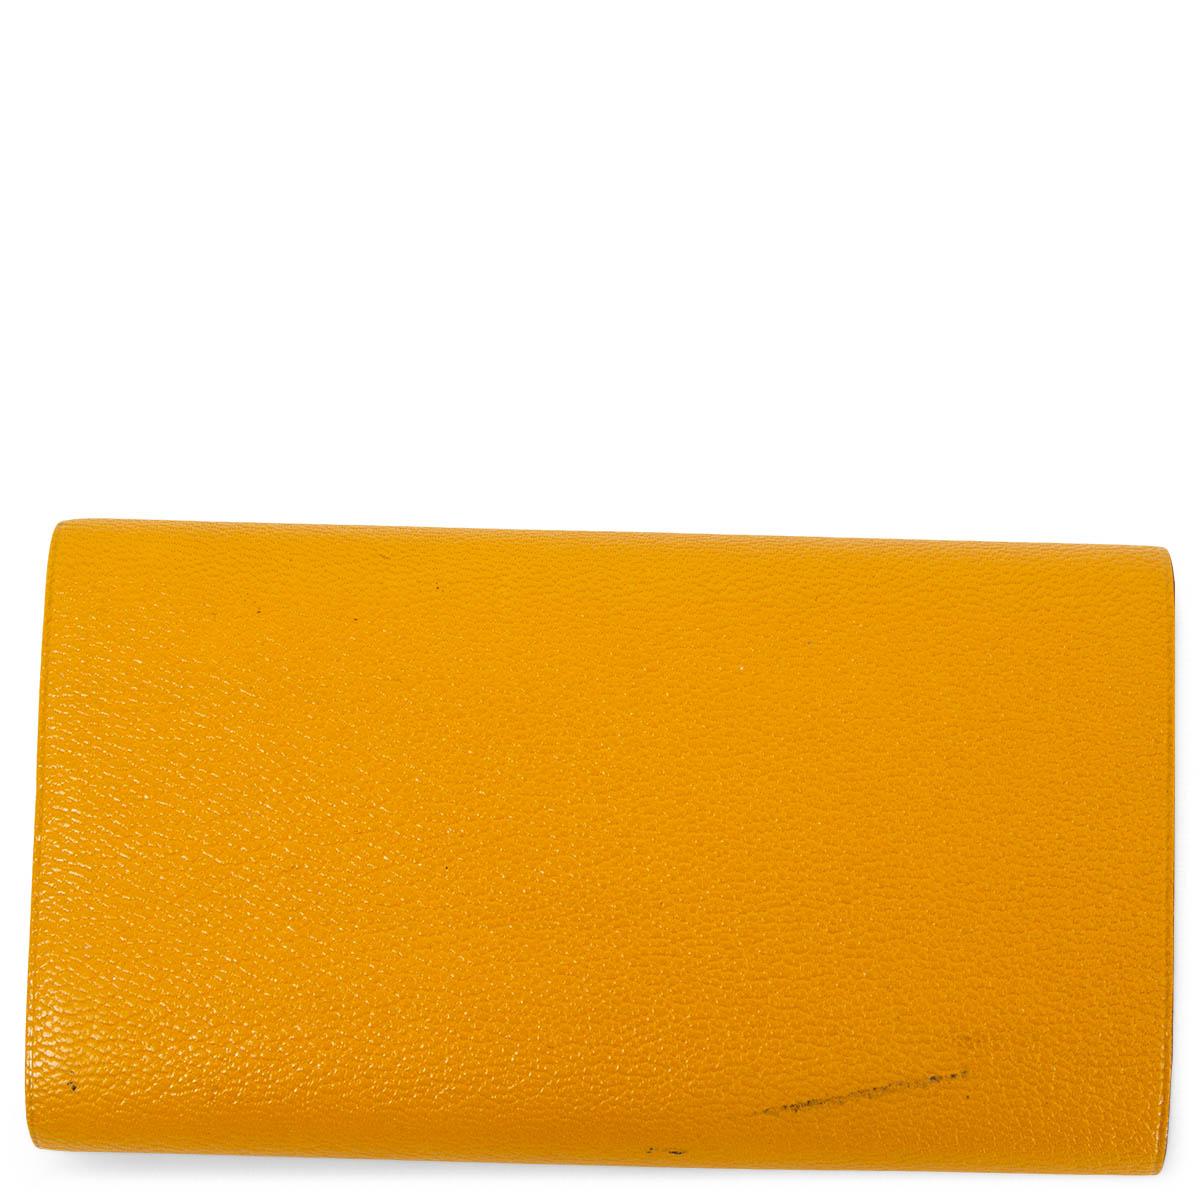 Yellow HERMES Jaune yellow Mysore leather CAHIER ROULE Roll Notebook For Sale